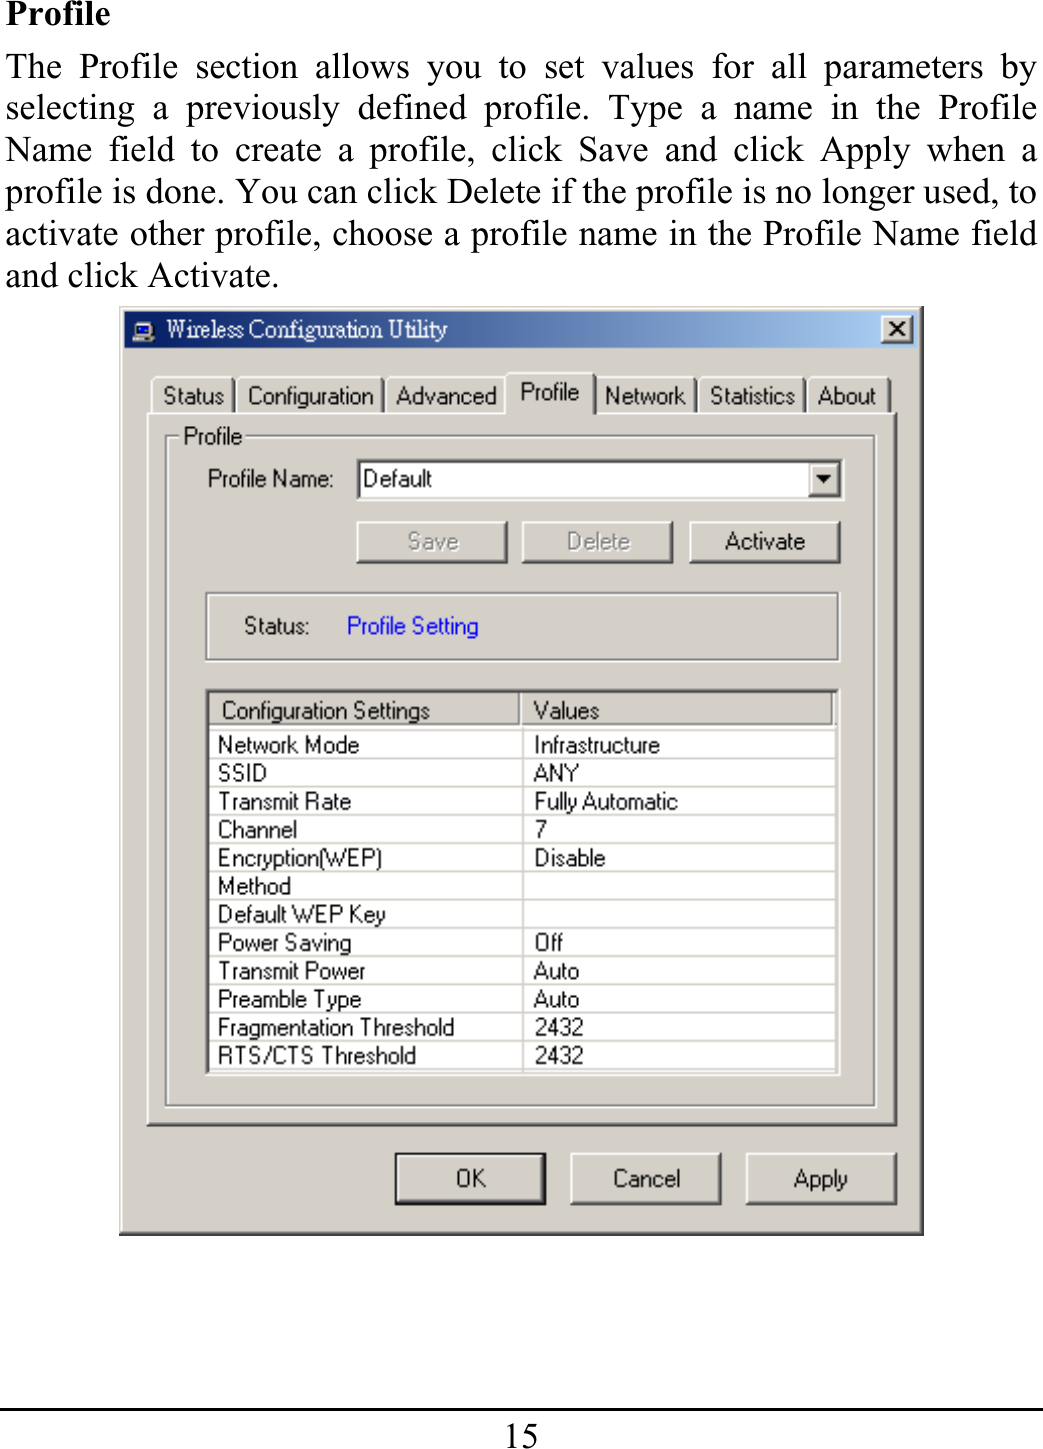 15ProfileThe Profile section allows you to set values for all parameters by selecting a previously defined profile. Type a name in the Profile Name field to create a profile, click Save and click Apply when a profile is done. You can click Delete if the profile is no longer used, to activate other profile, choose a profile name in the Profile Name field and click Activate. 